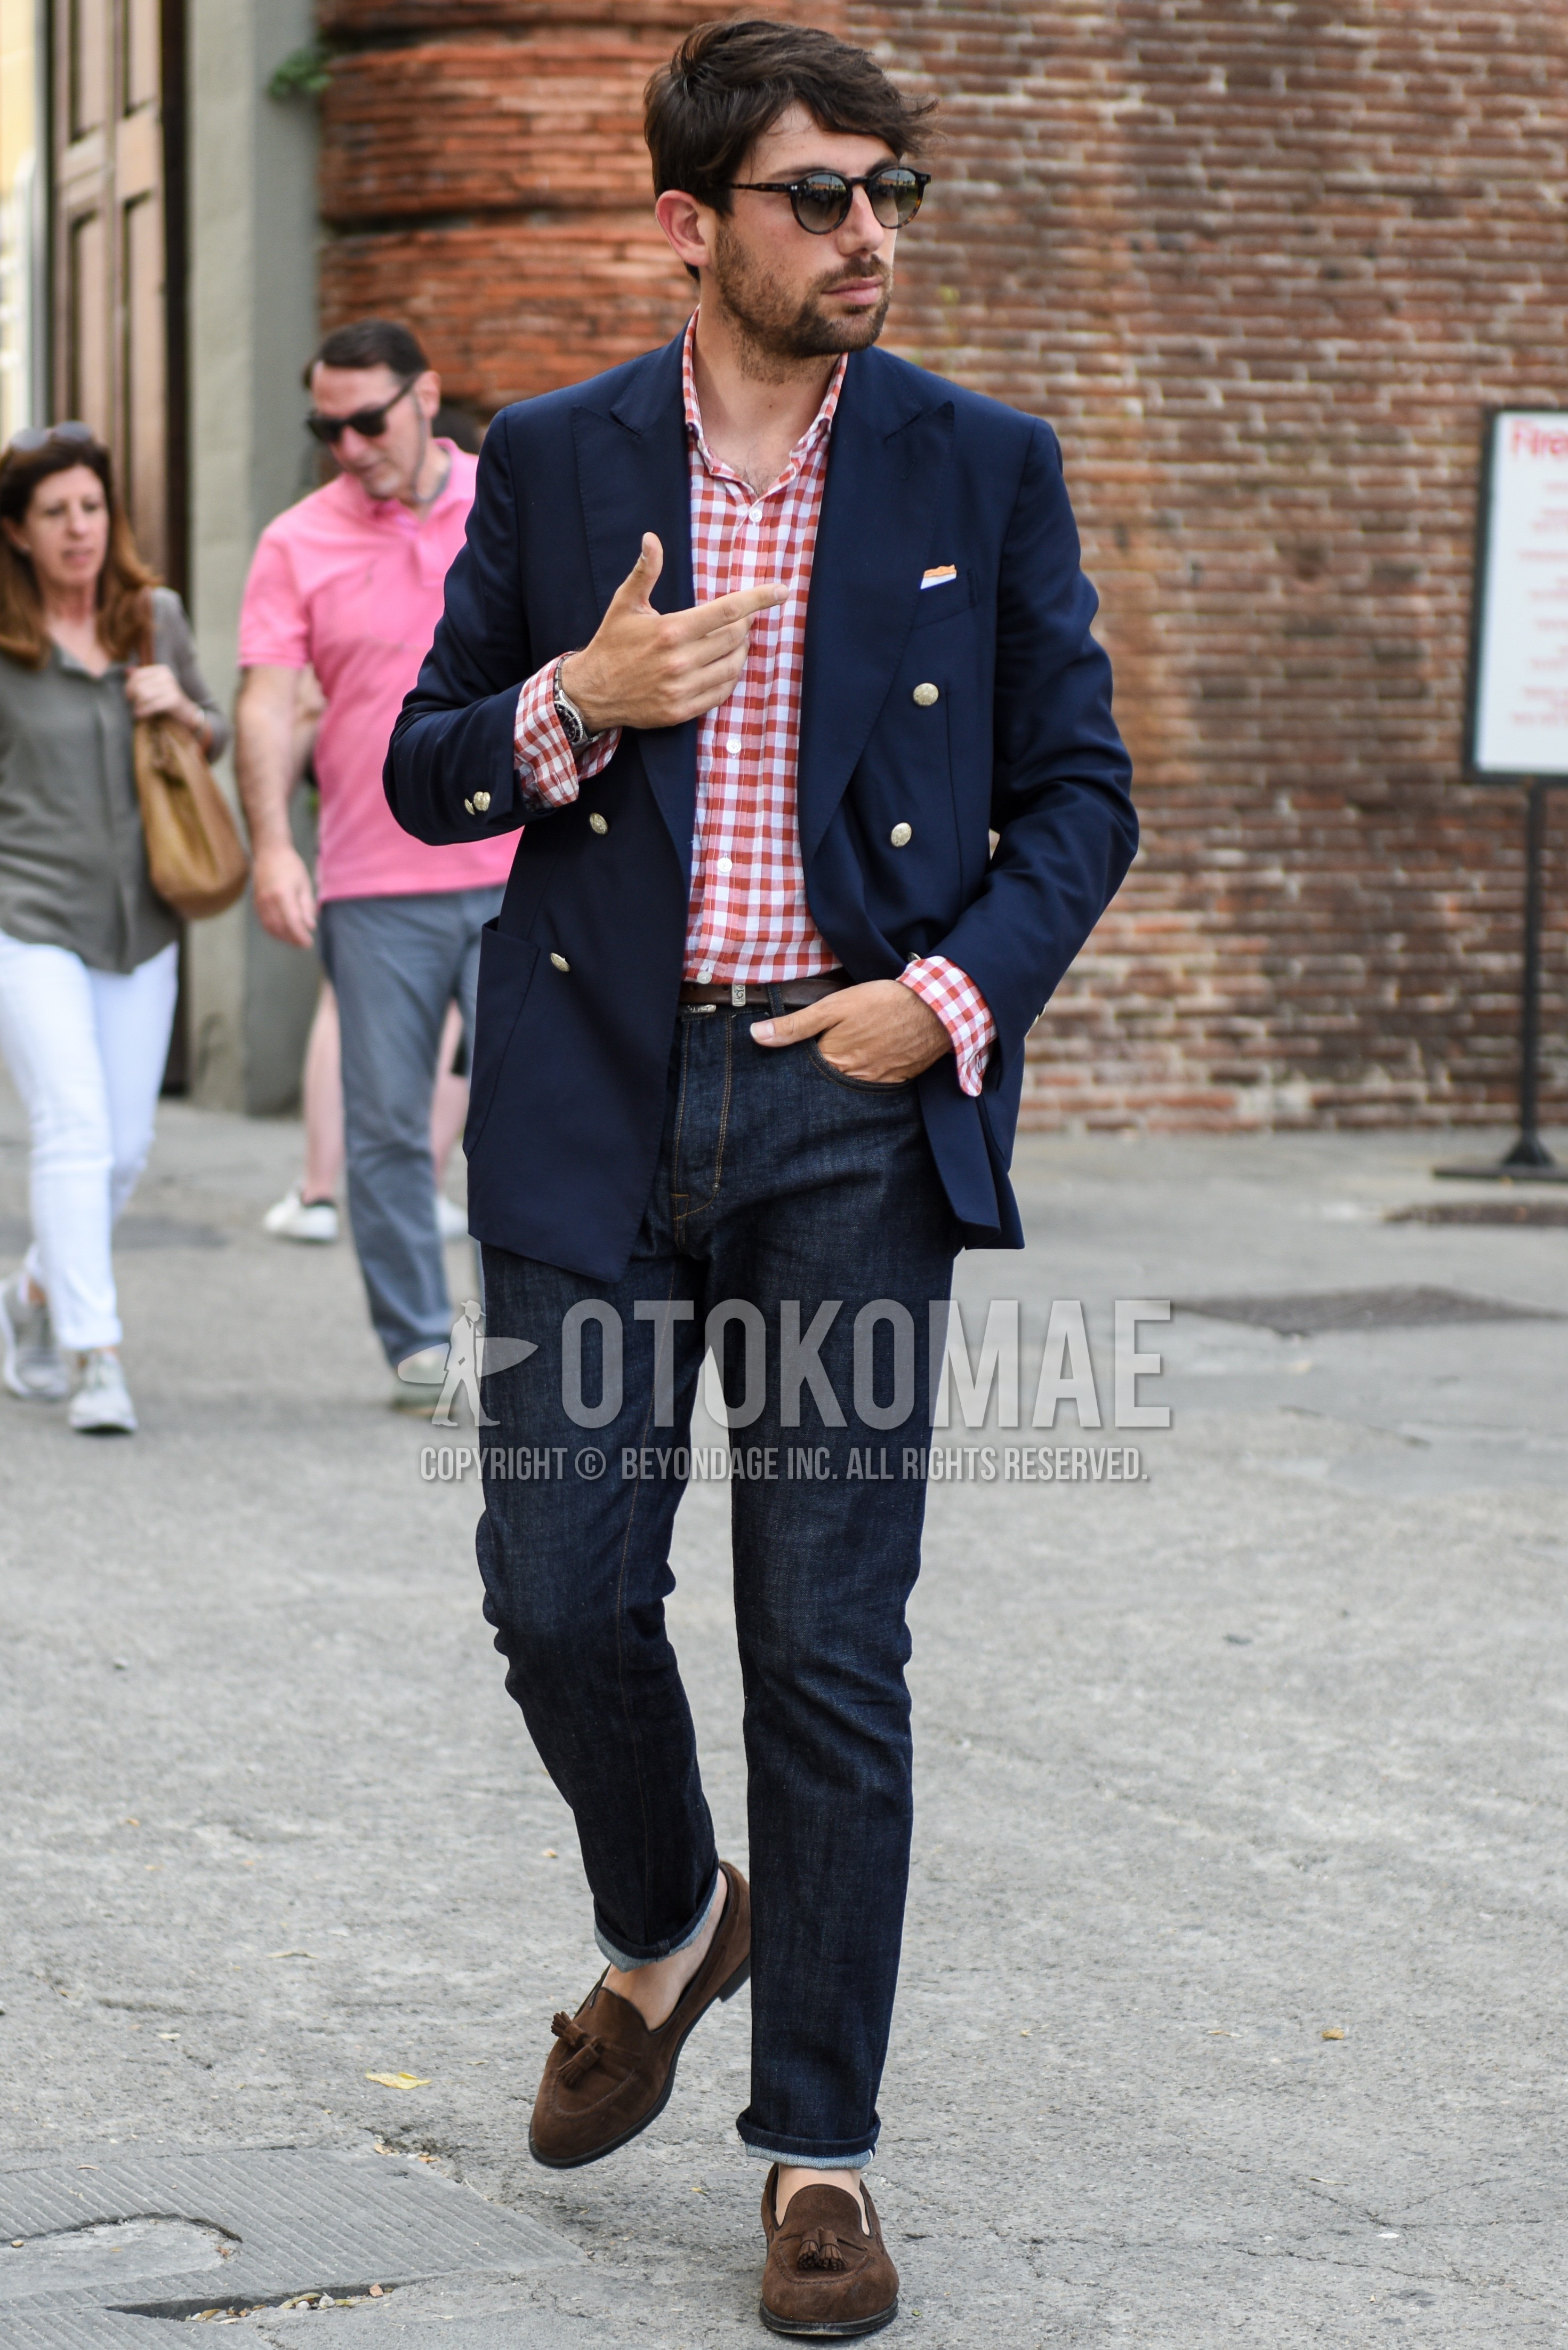 Men's spring summer autumn outfit with black plain sunglasses, navy plain tailored jacket, white red check shirt, brown plain leather belt, navy plain denim/jeans, brown tassel loafers leather shoes.